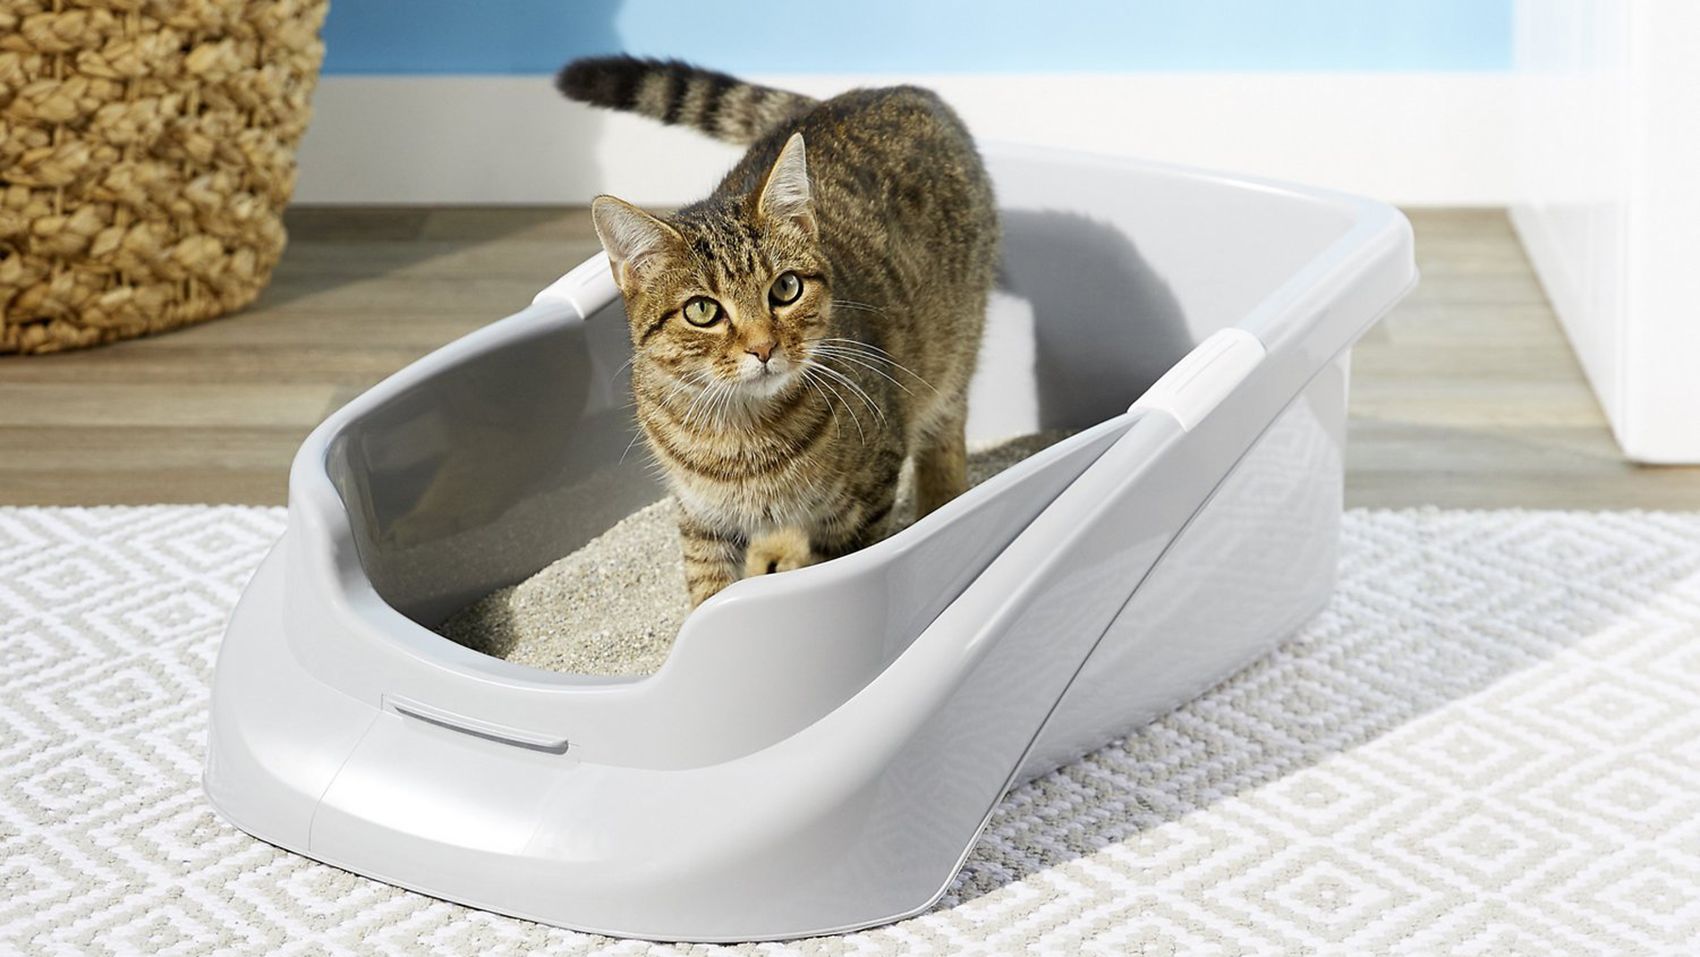 Which type of litter box is best for cats?